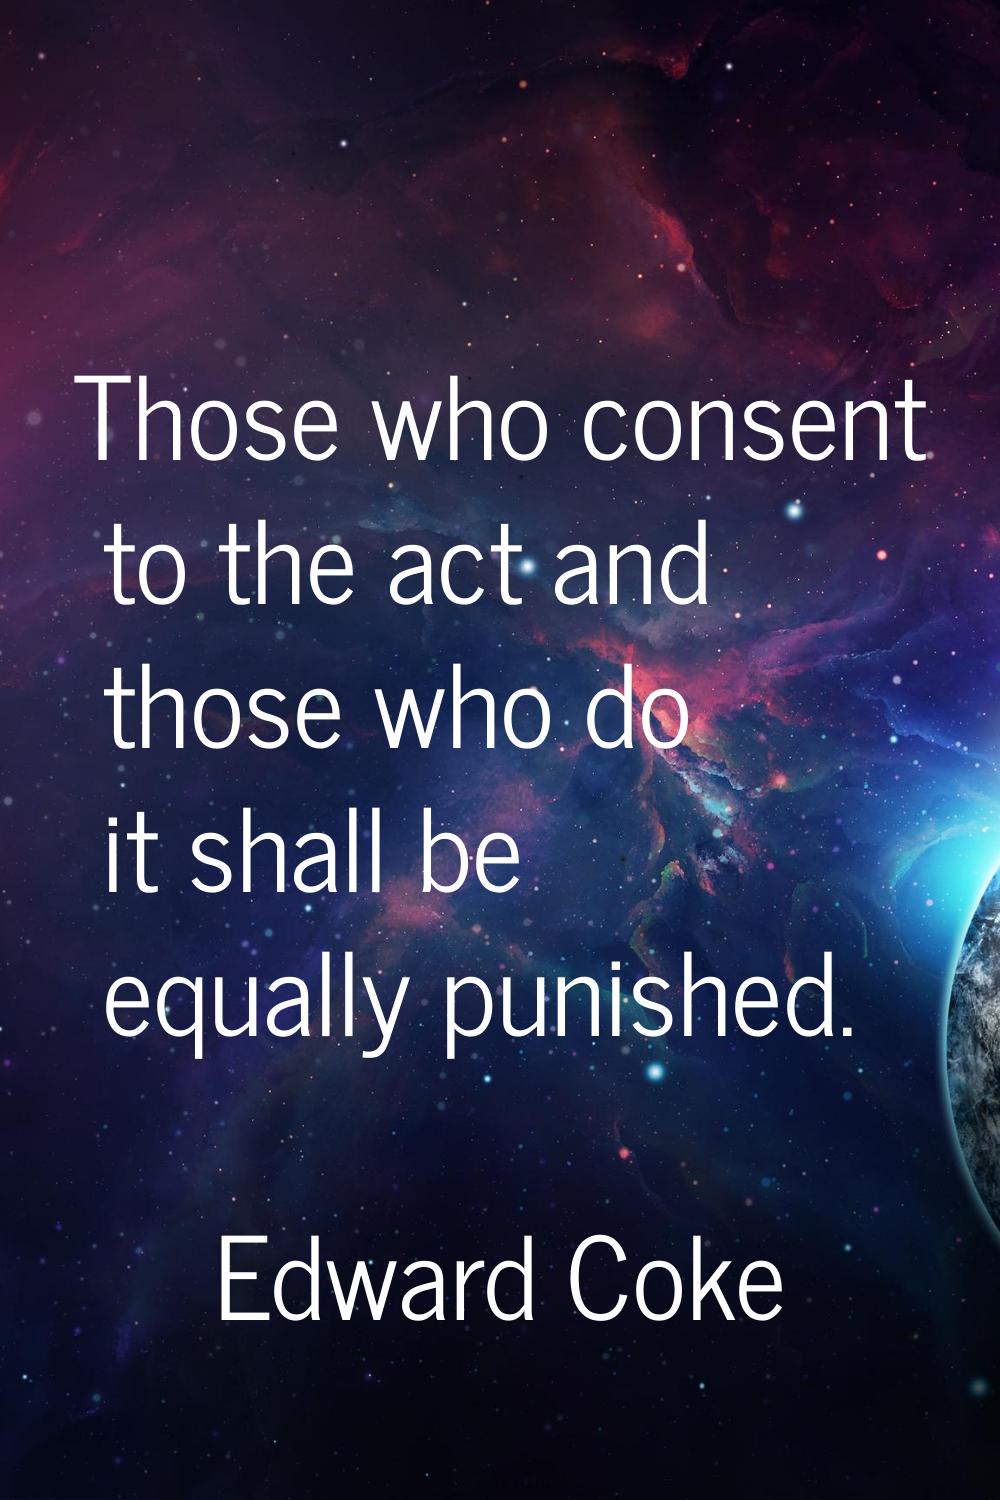 Those who consent to the act and those who do it shall be equally punished.